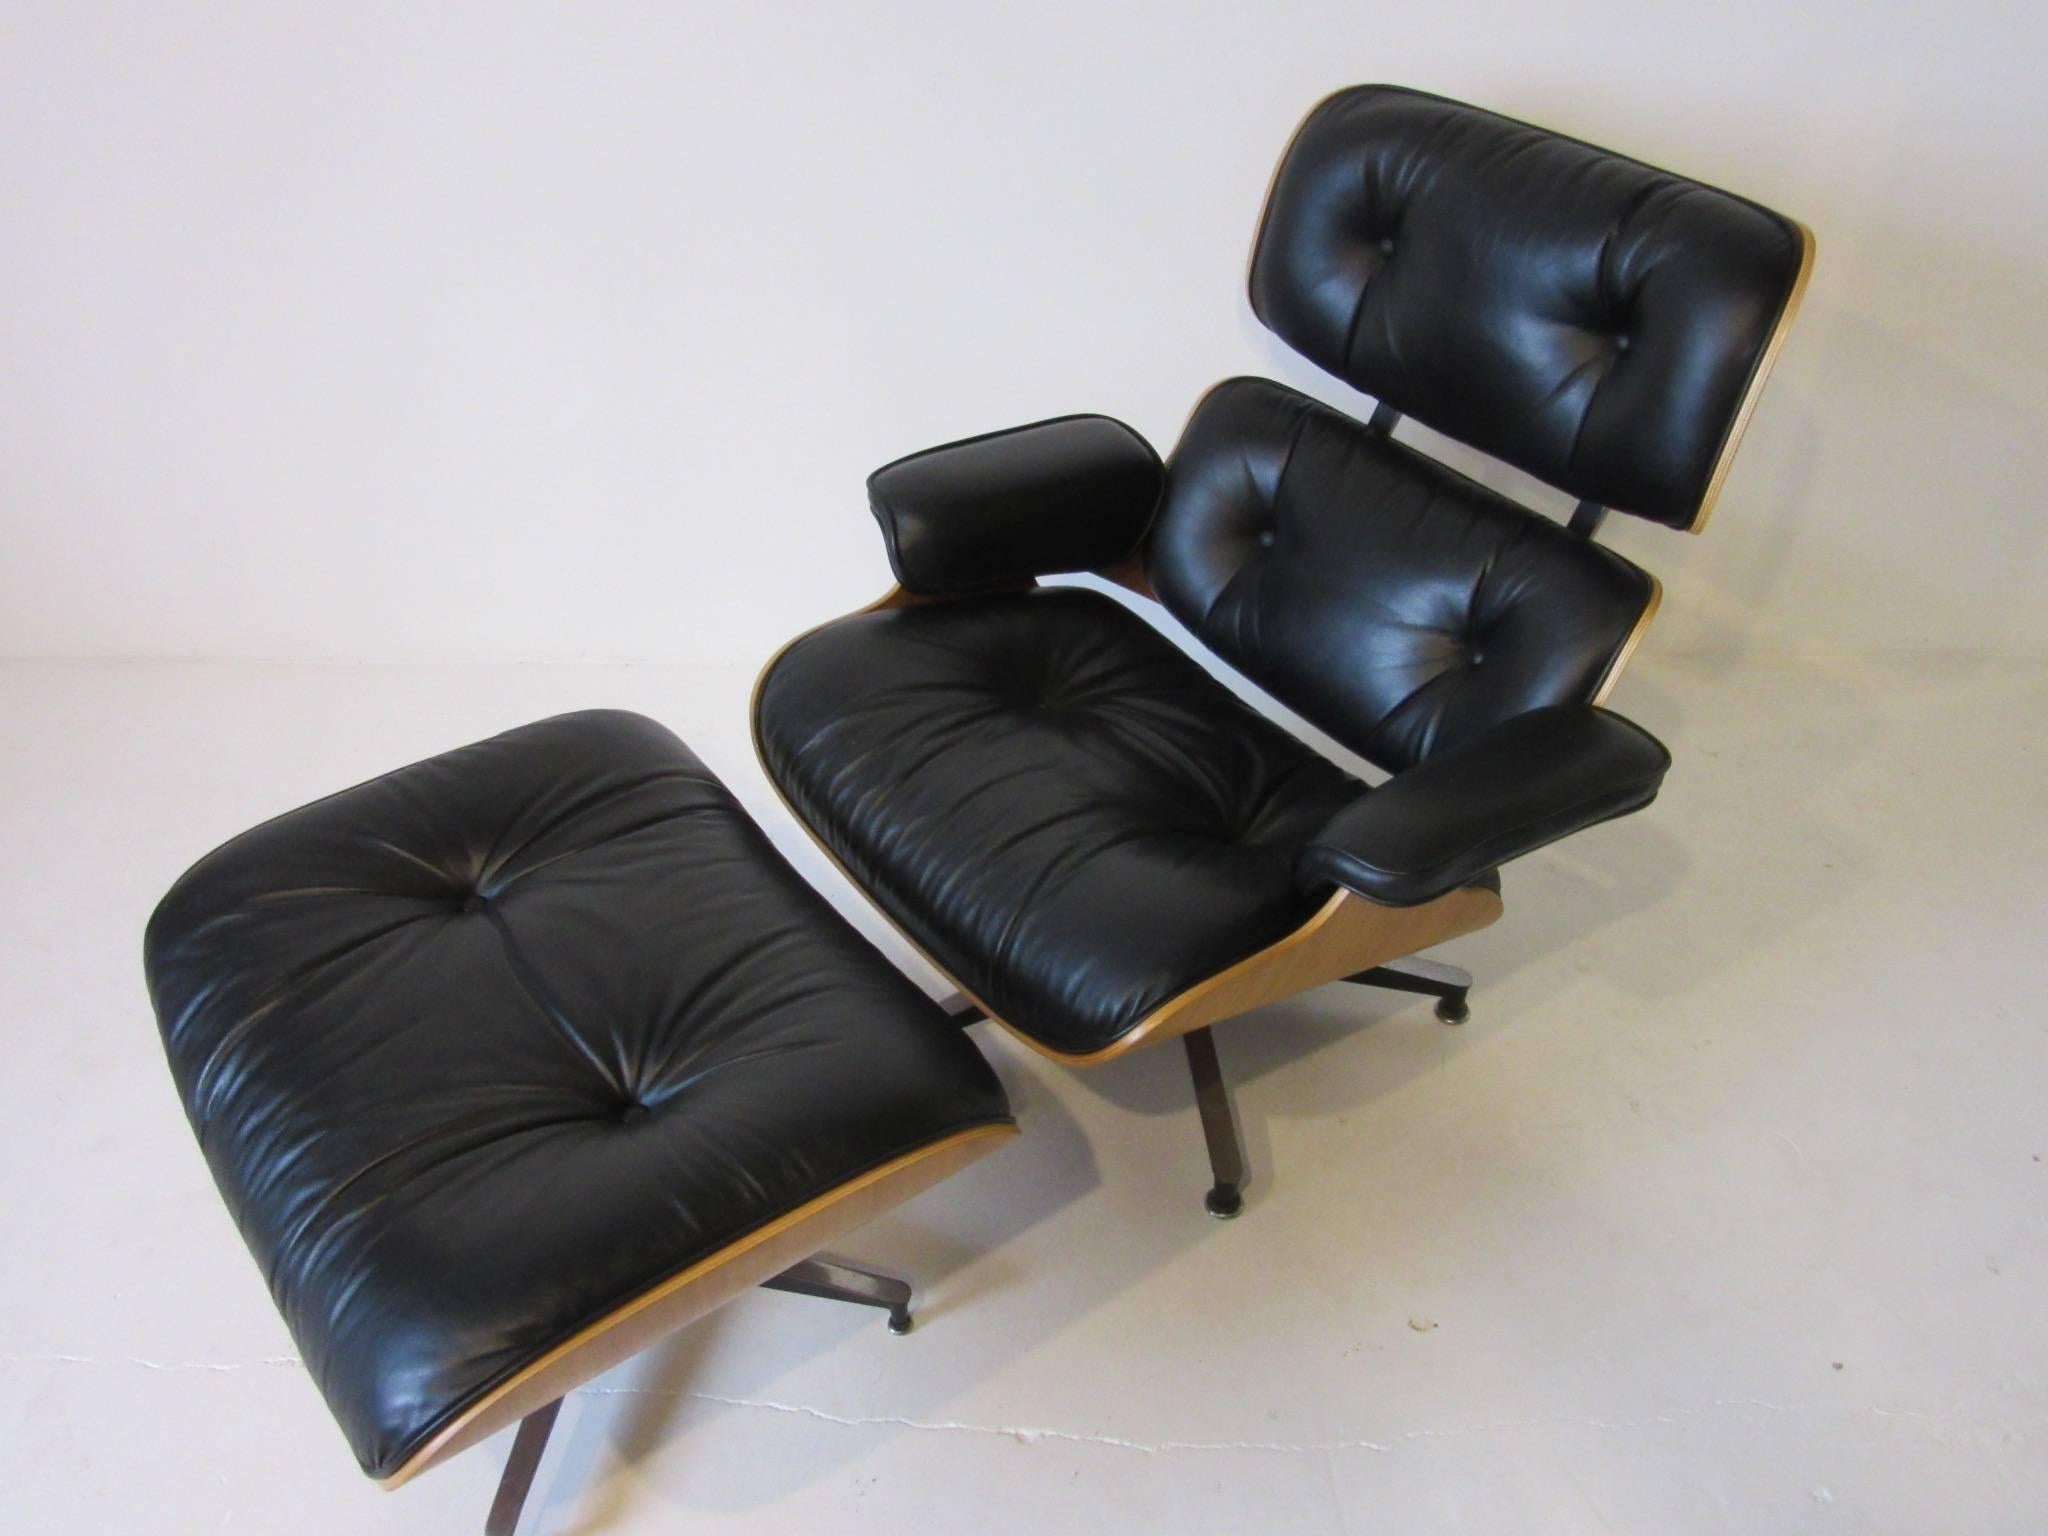 A soft and supple black leather Classic Eames 670 lounge chair with matching ottoman in walnut with cast aluminum legs. This iconic chair defines the style of Mid-Century as we know it today. Retains the manufacturers tags and is in wonderful